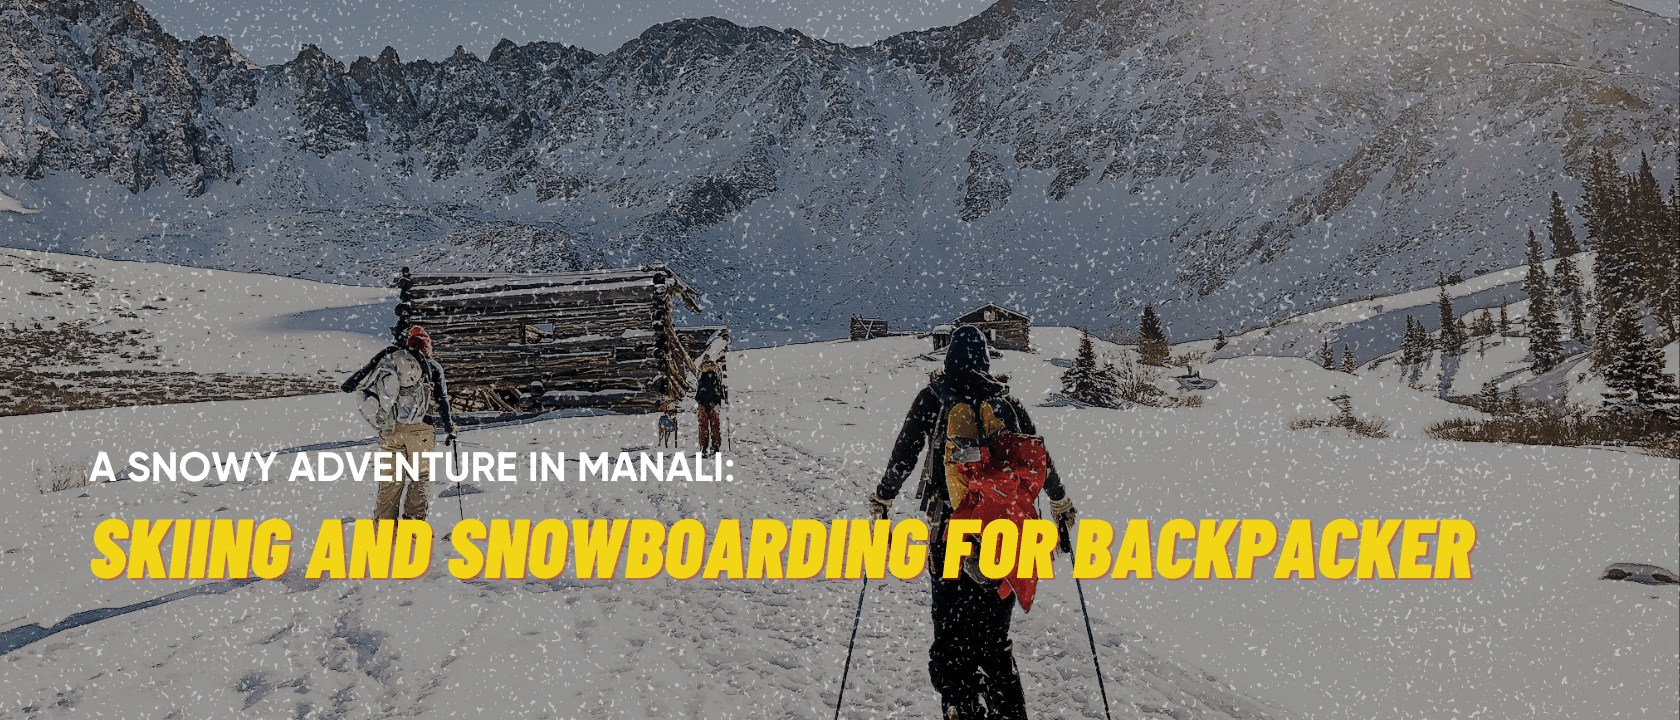 A Snowy Adventure in Manali: Skiing and Snowboarding for Backpacker